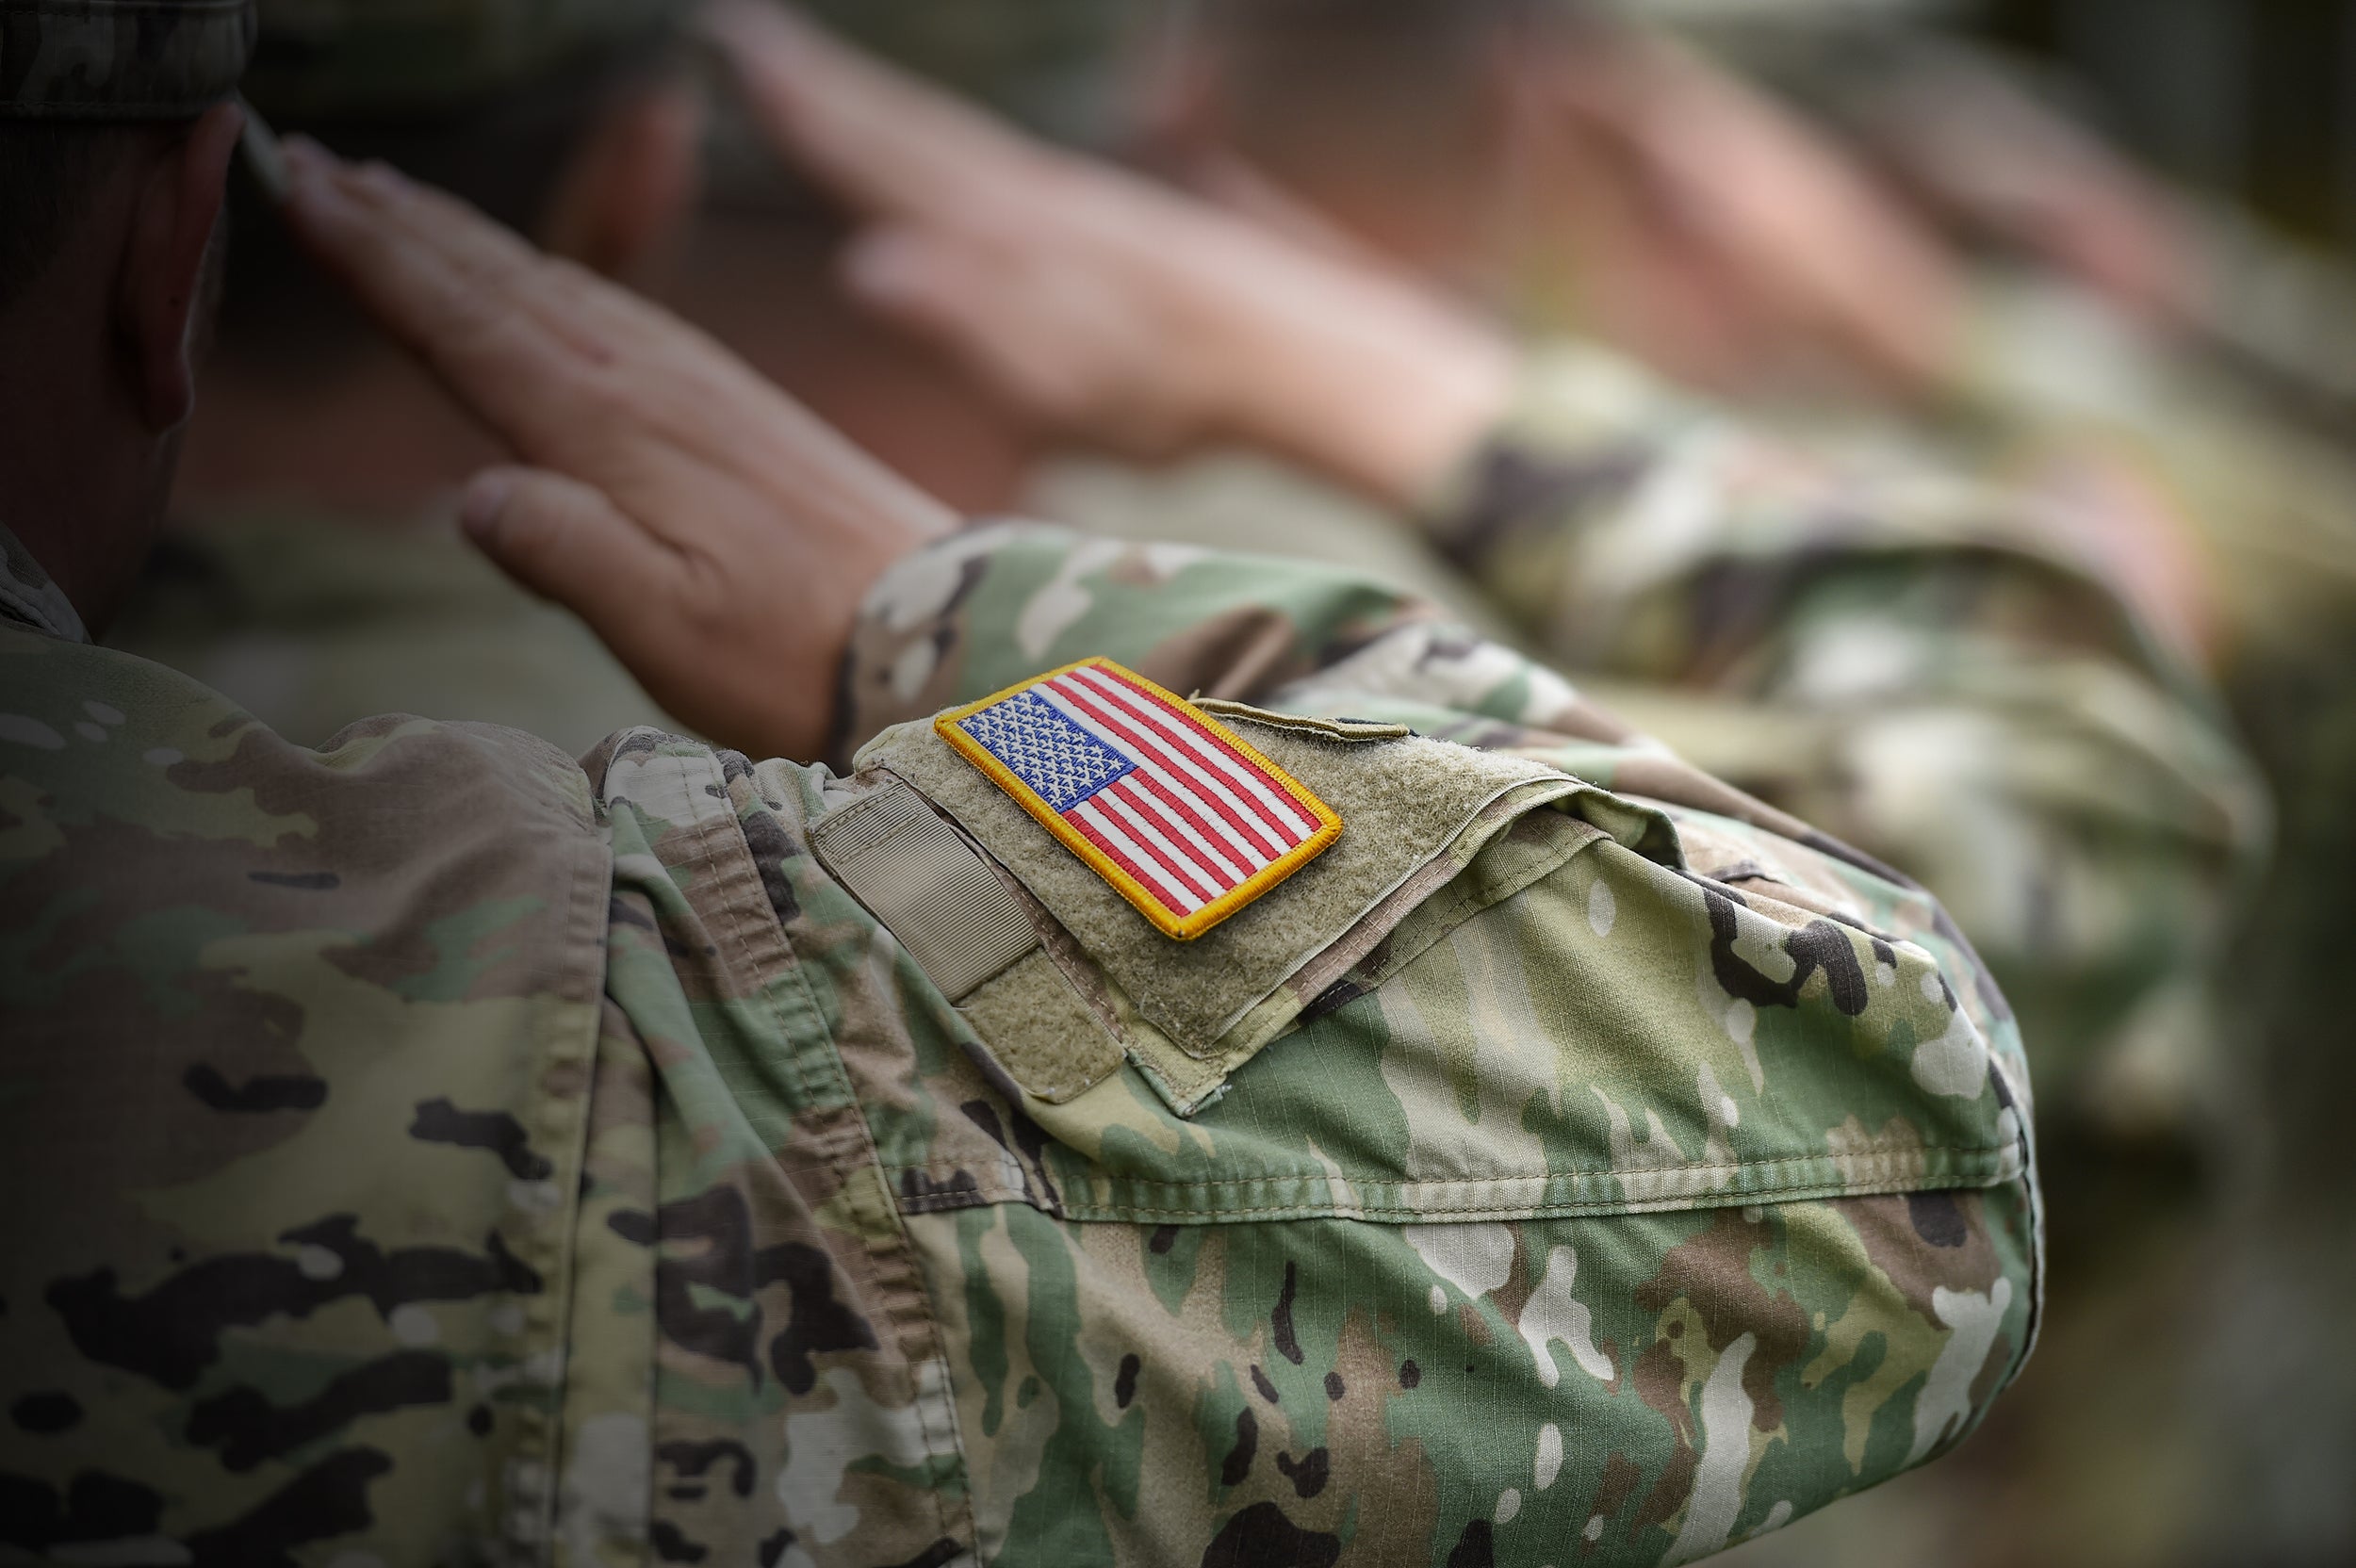 Military guy saluting with an american flag patch on arm